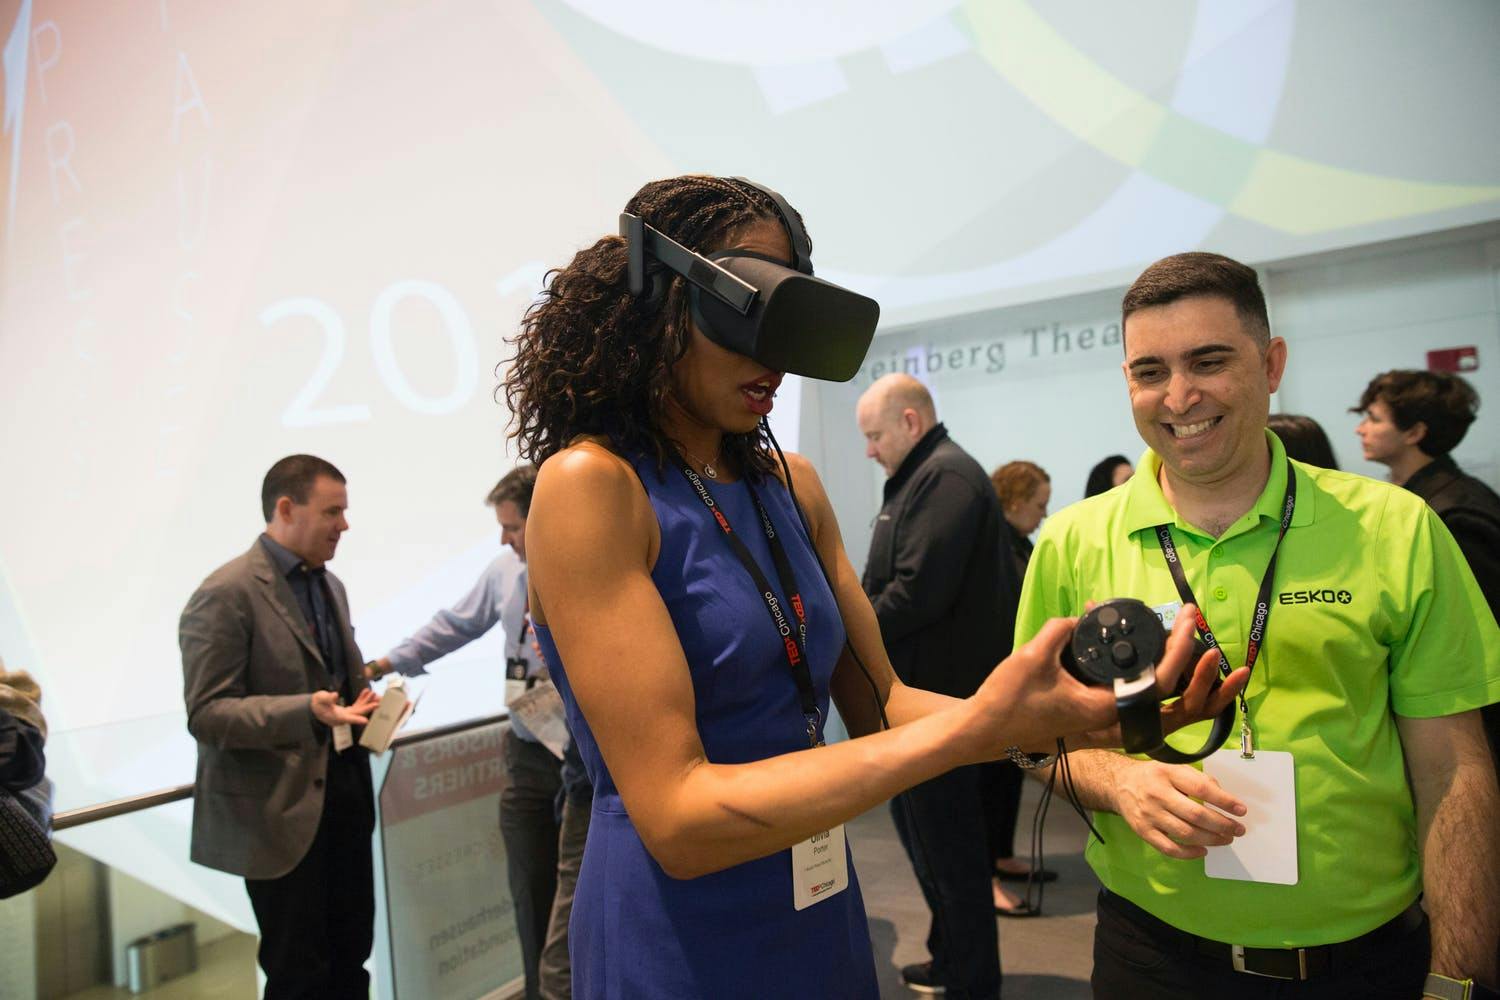 Guest tries on virtual reality headset at TEDxChicago 2019 | PartySlate